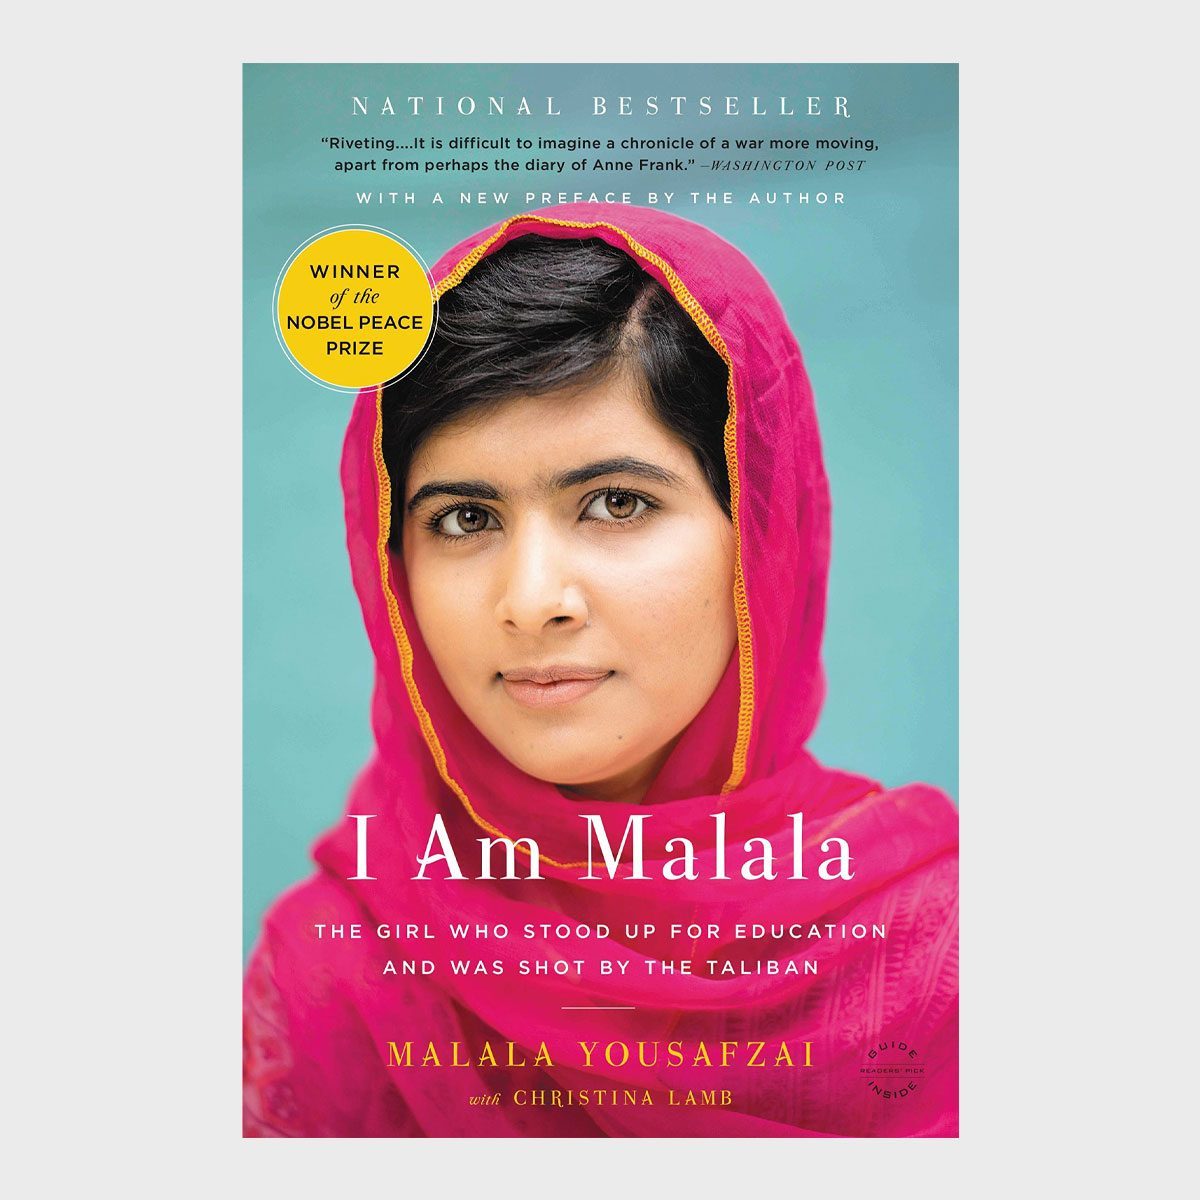 I Am Malala The Girl Who Stood Up For Education And Was Shot By The Taliban By Malala Yousafzai